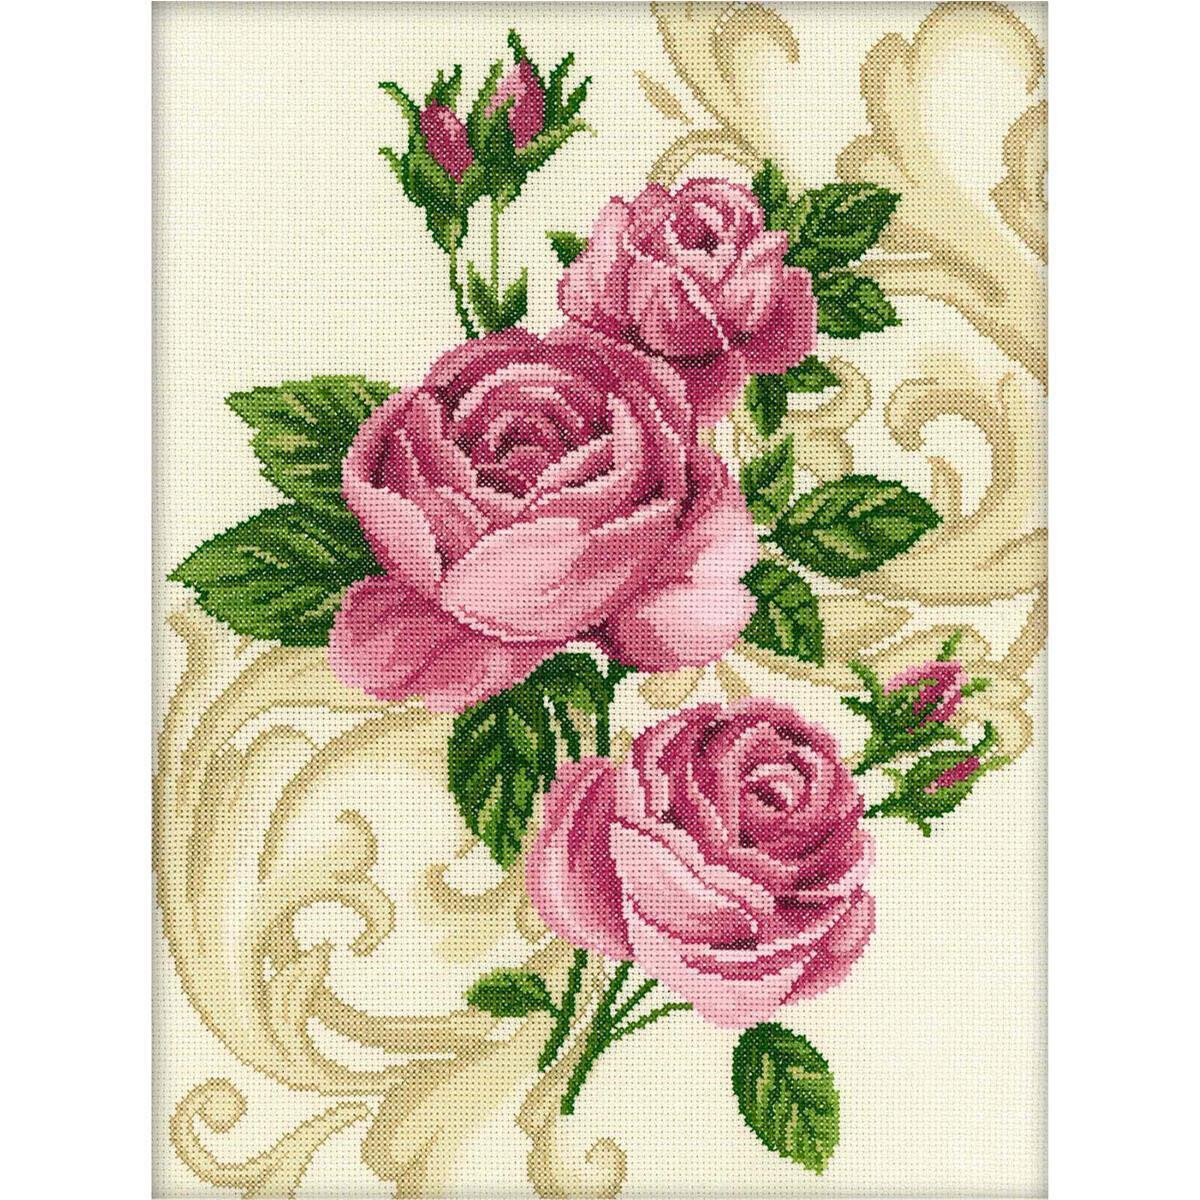 RTO counted Cross Stitch Kit "Ornament-Roses"...